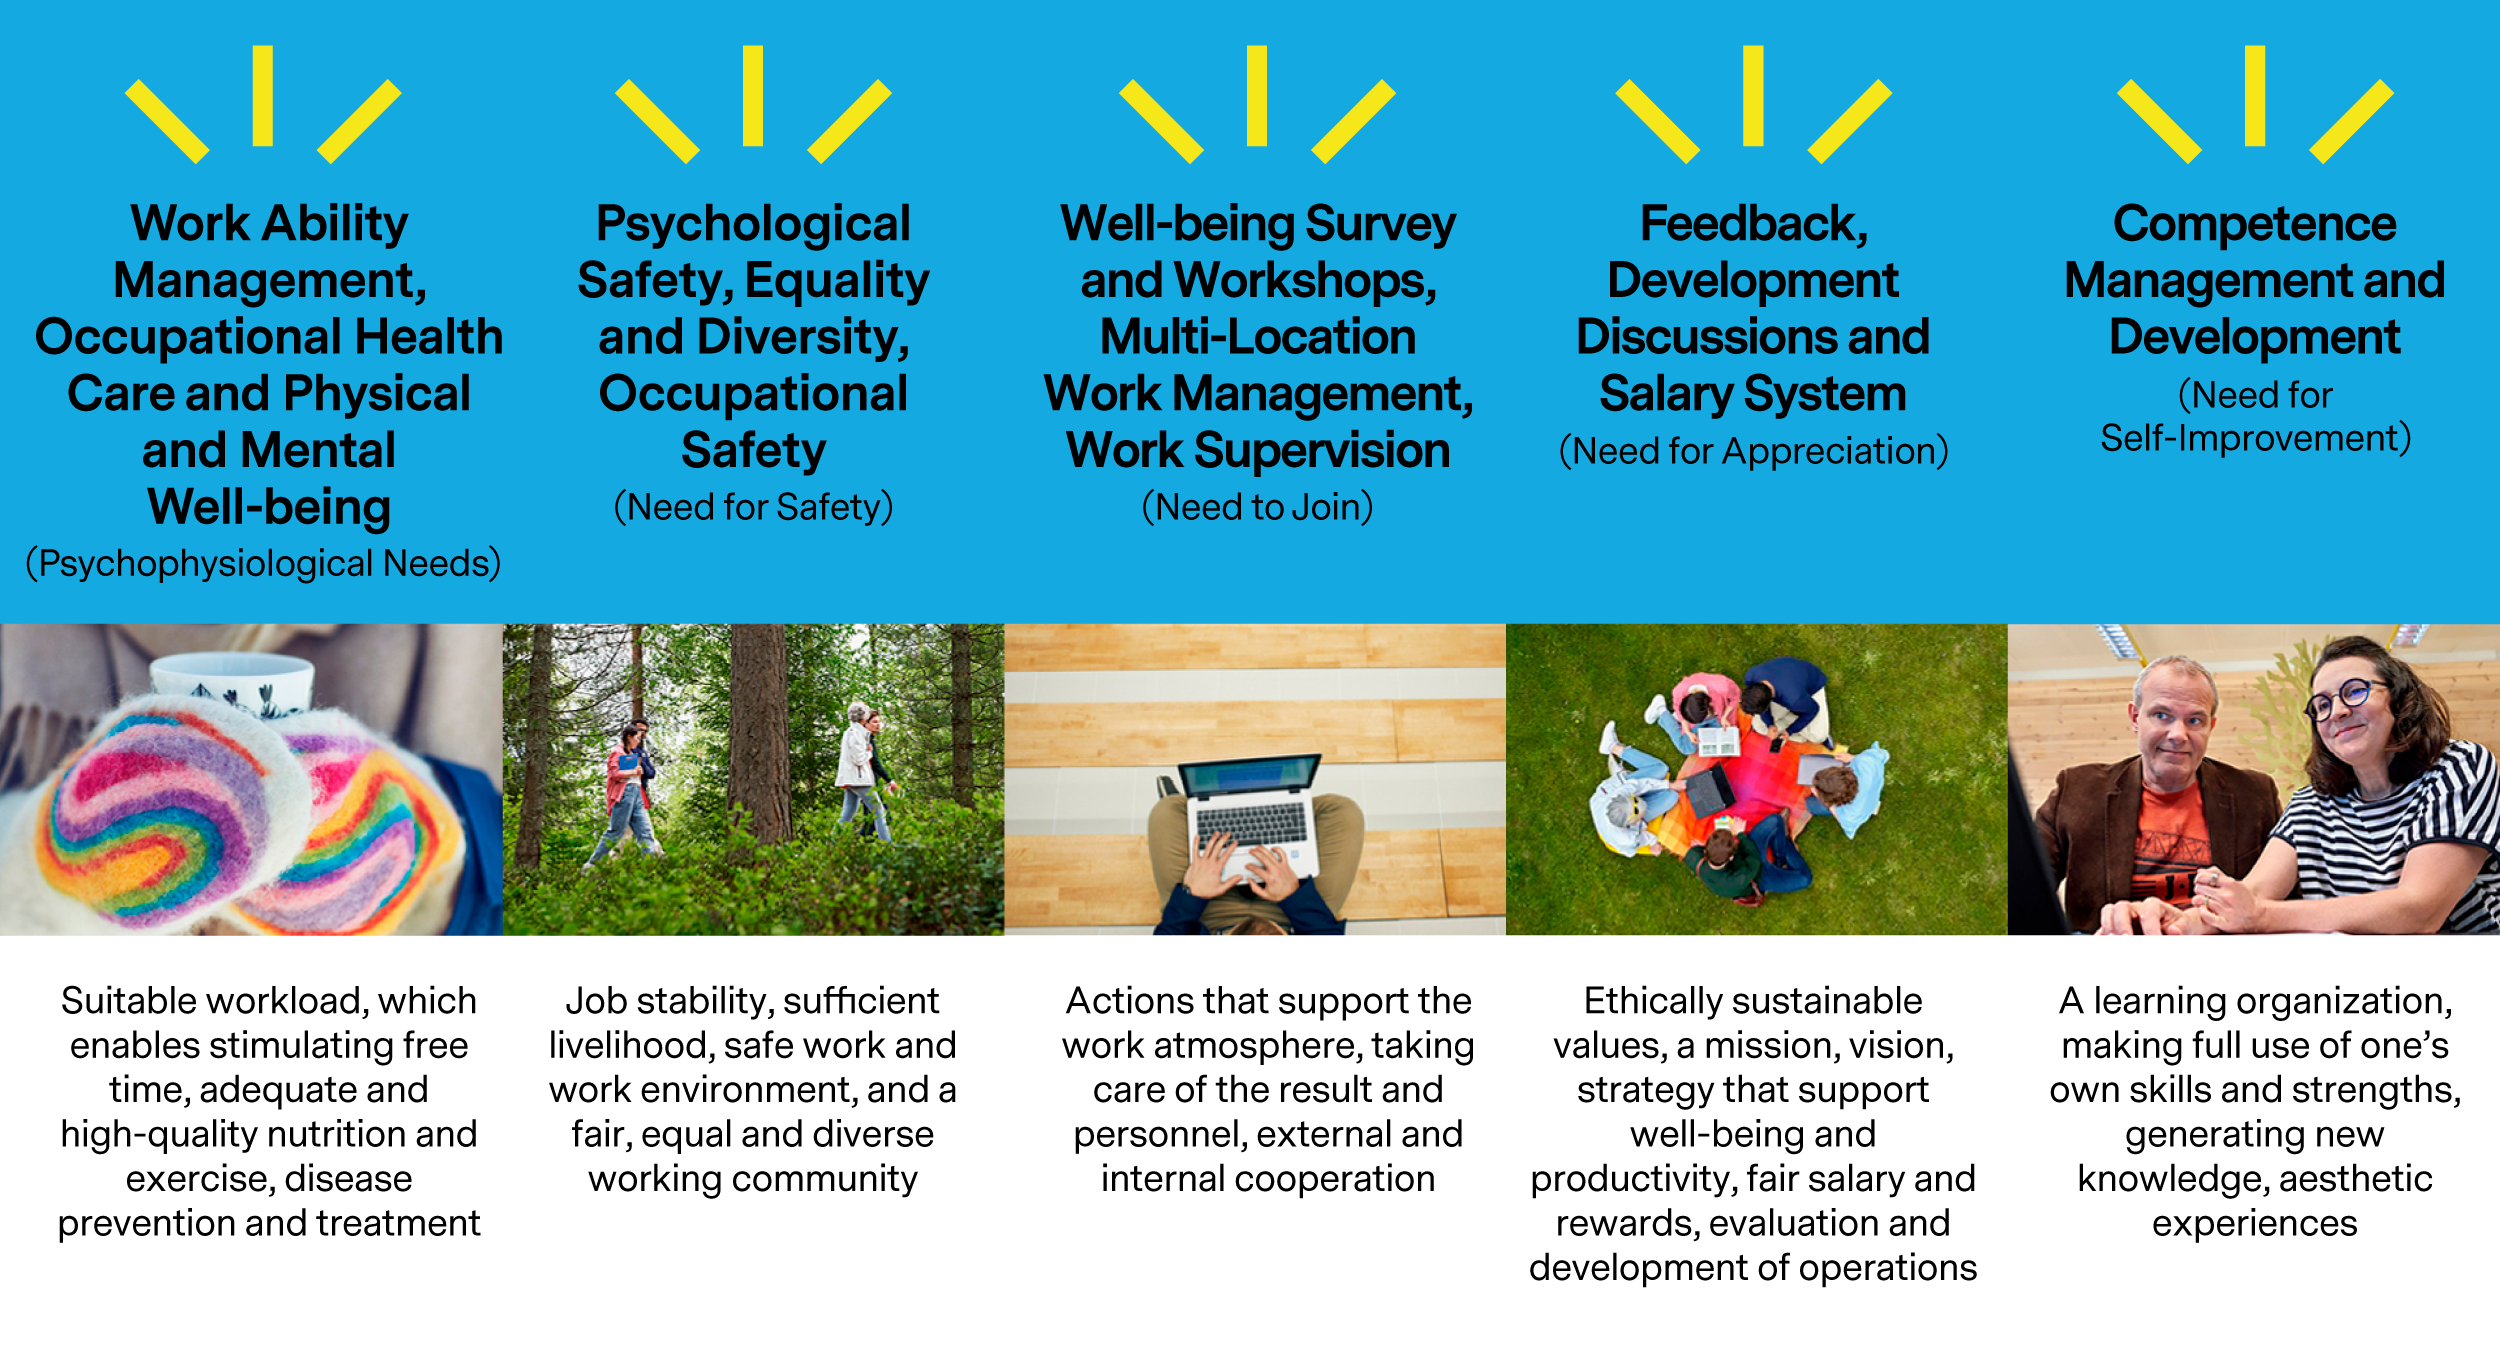 The well-being toolkit for line managers brings together the services available to the UO’s staff, which employees and line managers can use. The toolkit offers ways to strengthen the well-being of oneself and the entire work community.